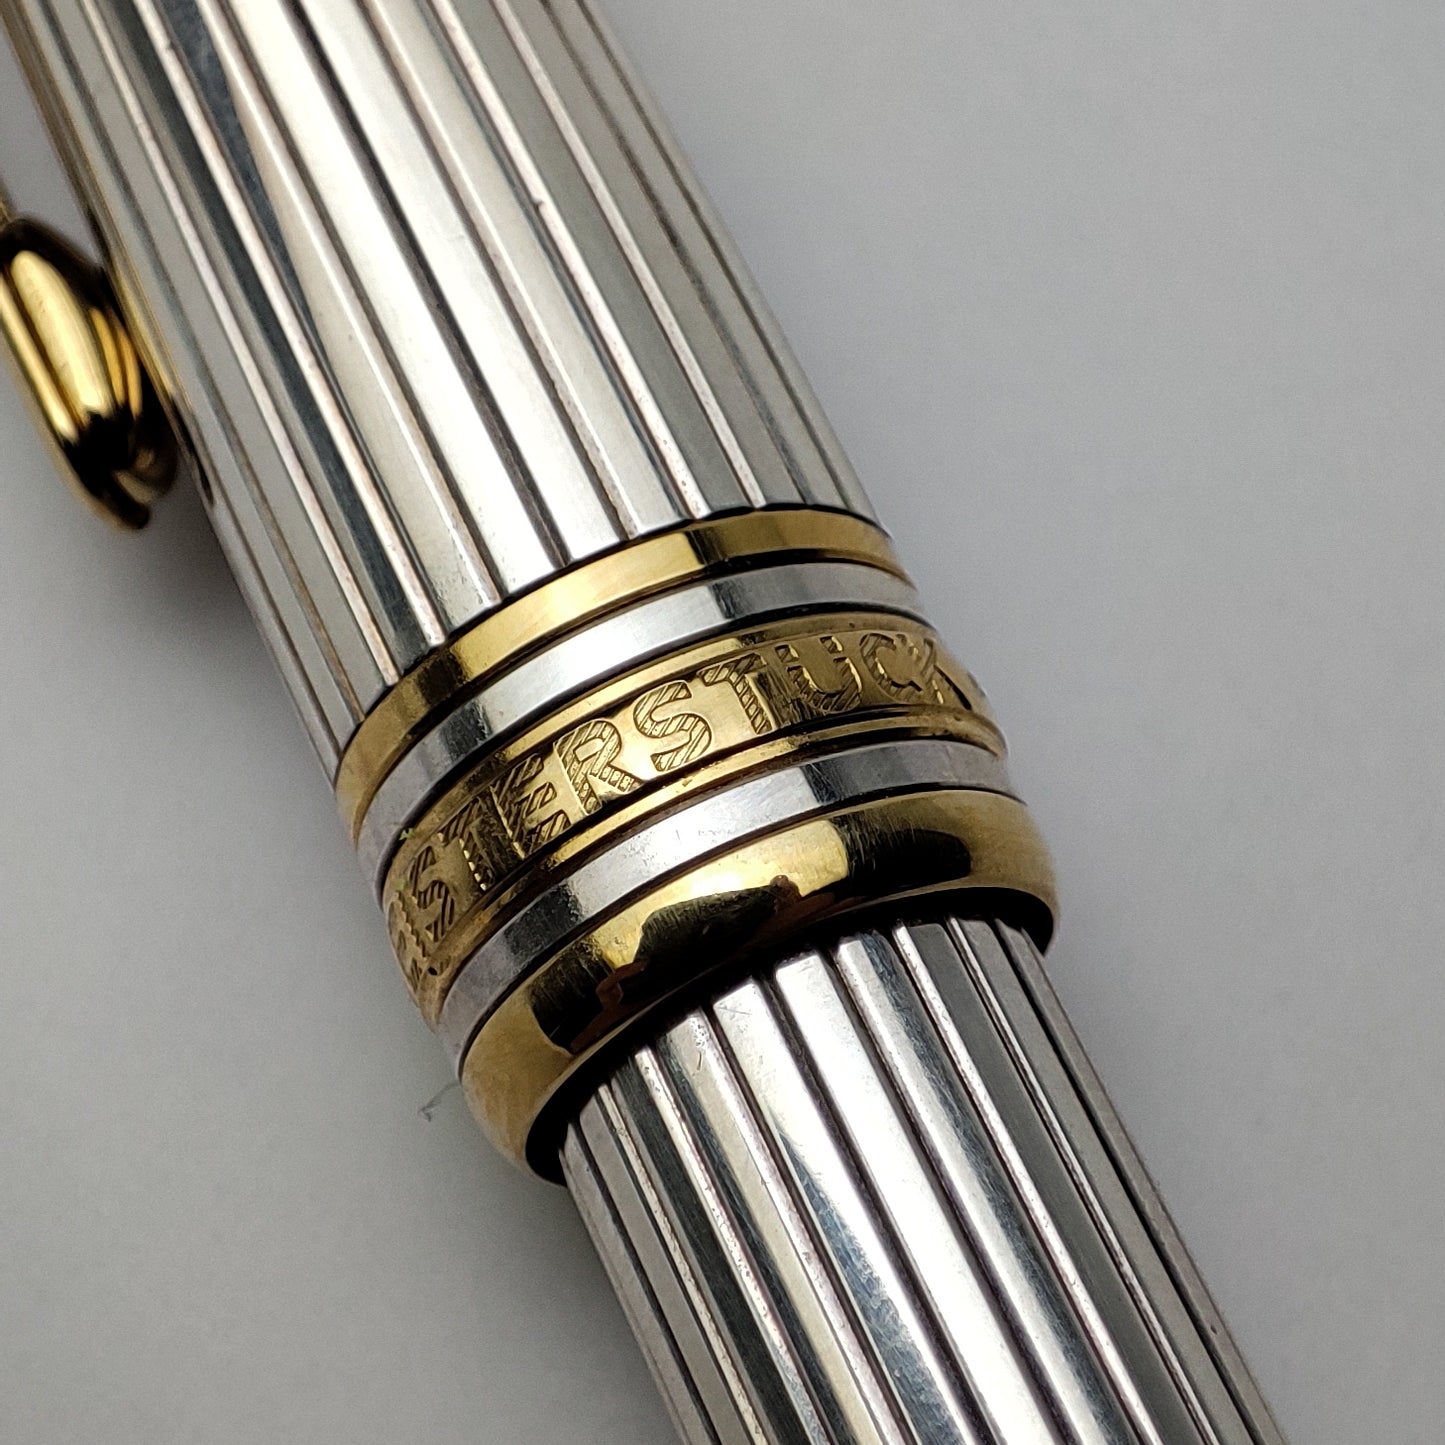 MONTBLANC 114 SOLITAIRE HOMMAGE TO WOLFGANG AMADEUS MOZART STERLING SILVER Ag925 PINSTRIPE FOUNTAIN PEN  (1997)